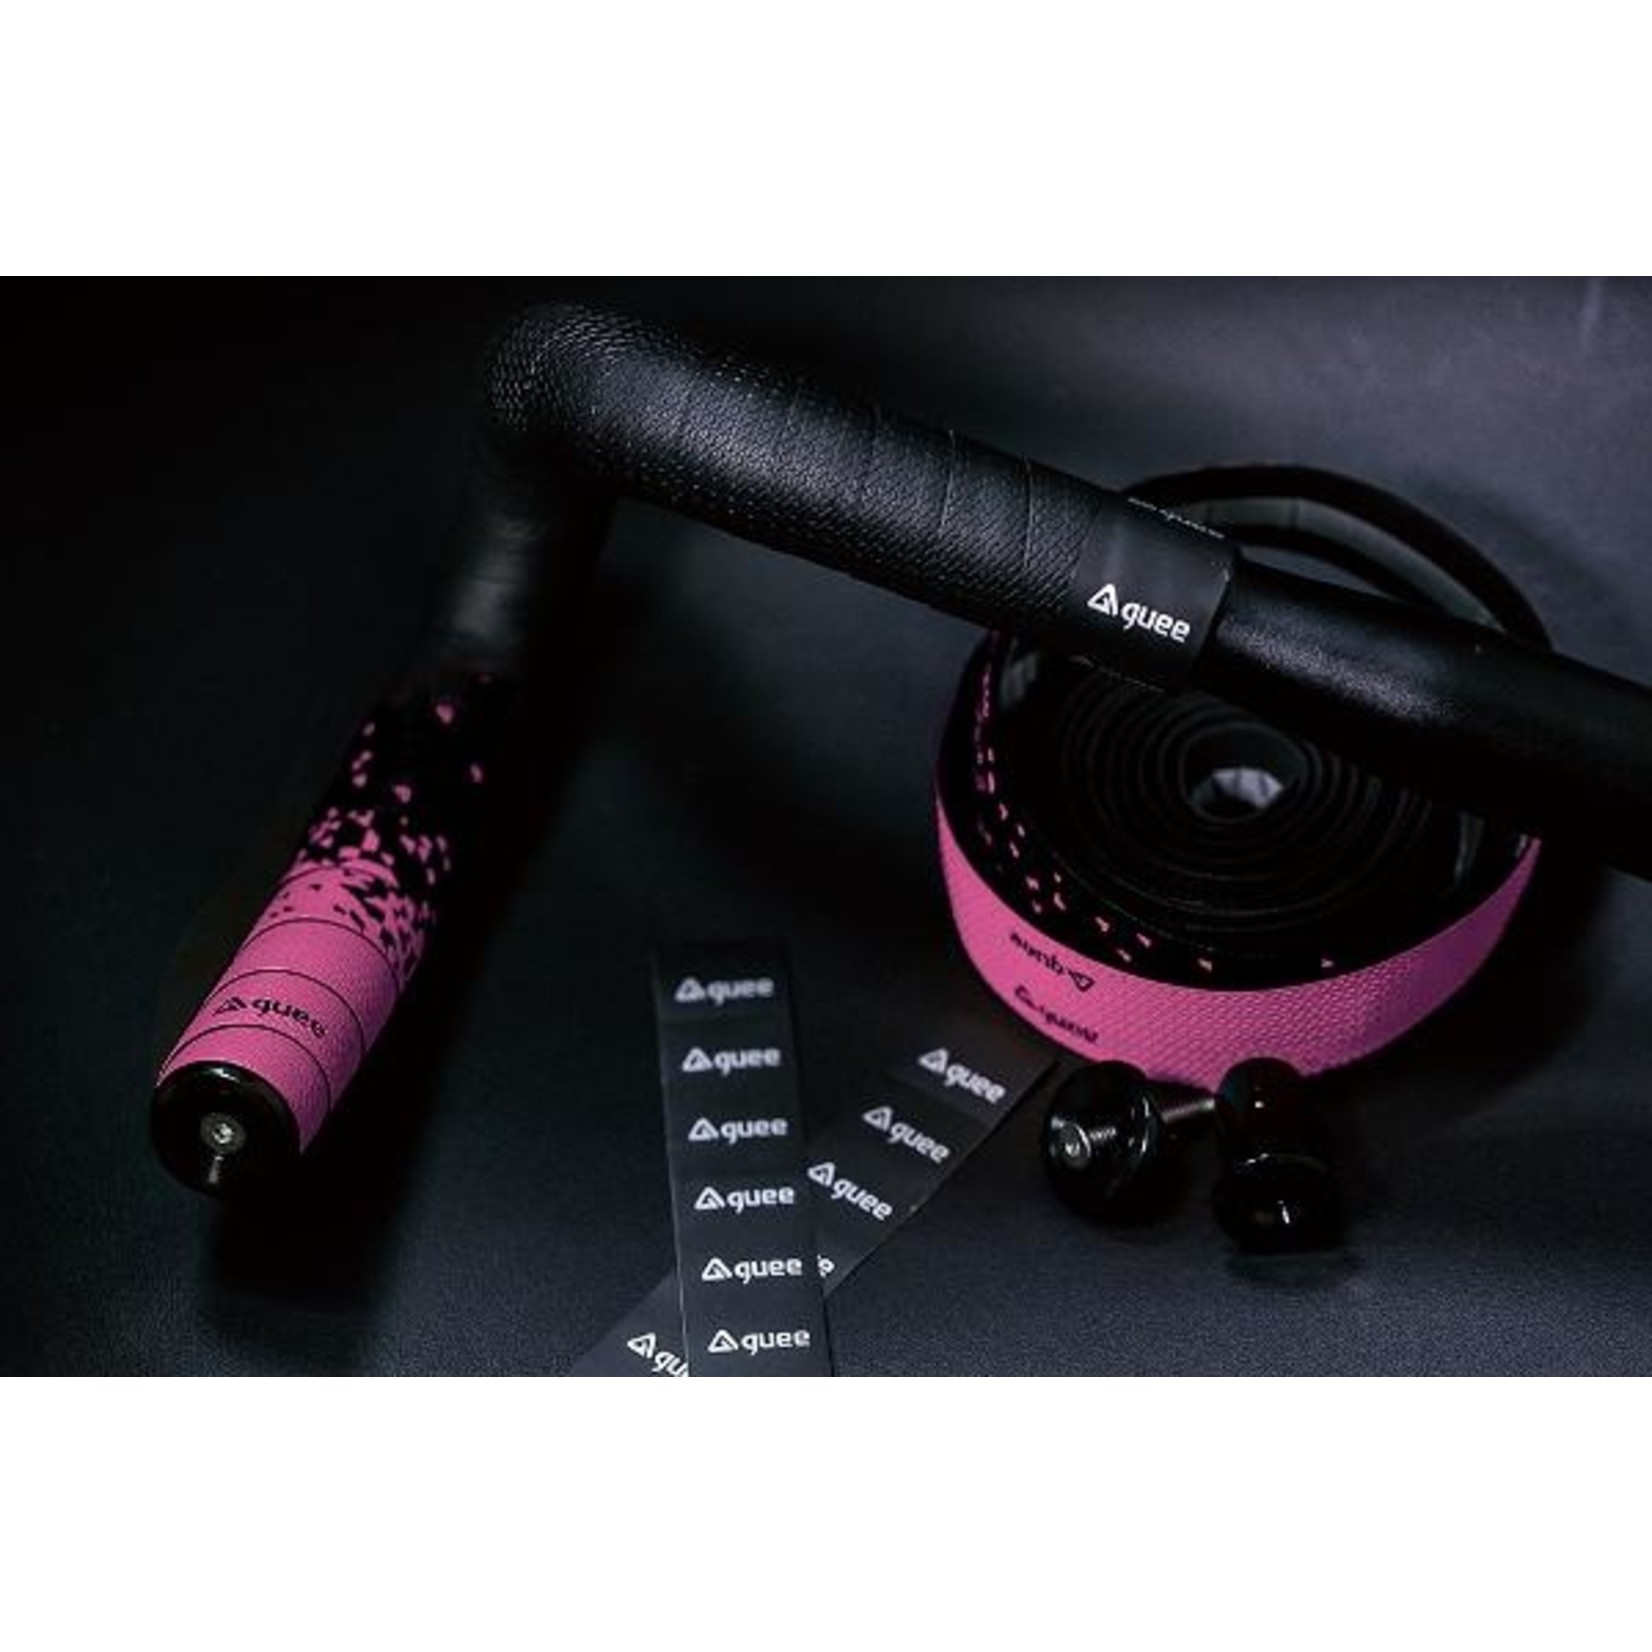 Guee Guee Bar Tape Bicycle - Dual - Black/ Pink